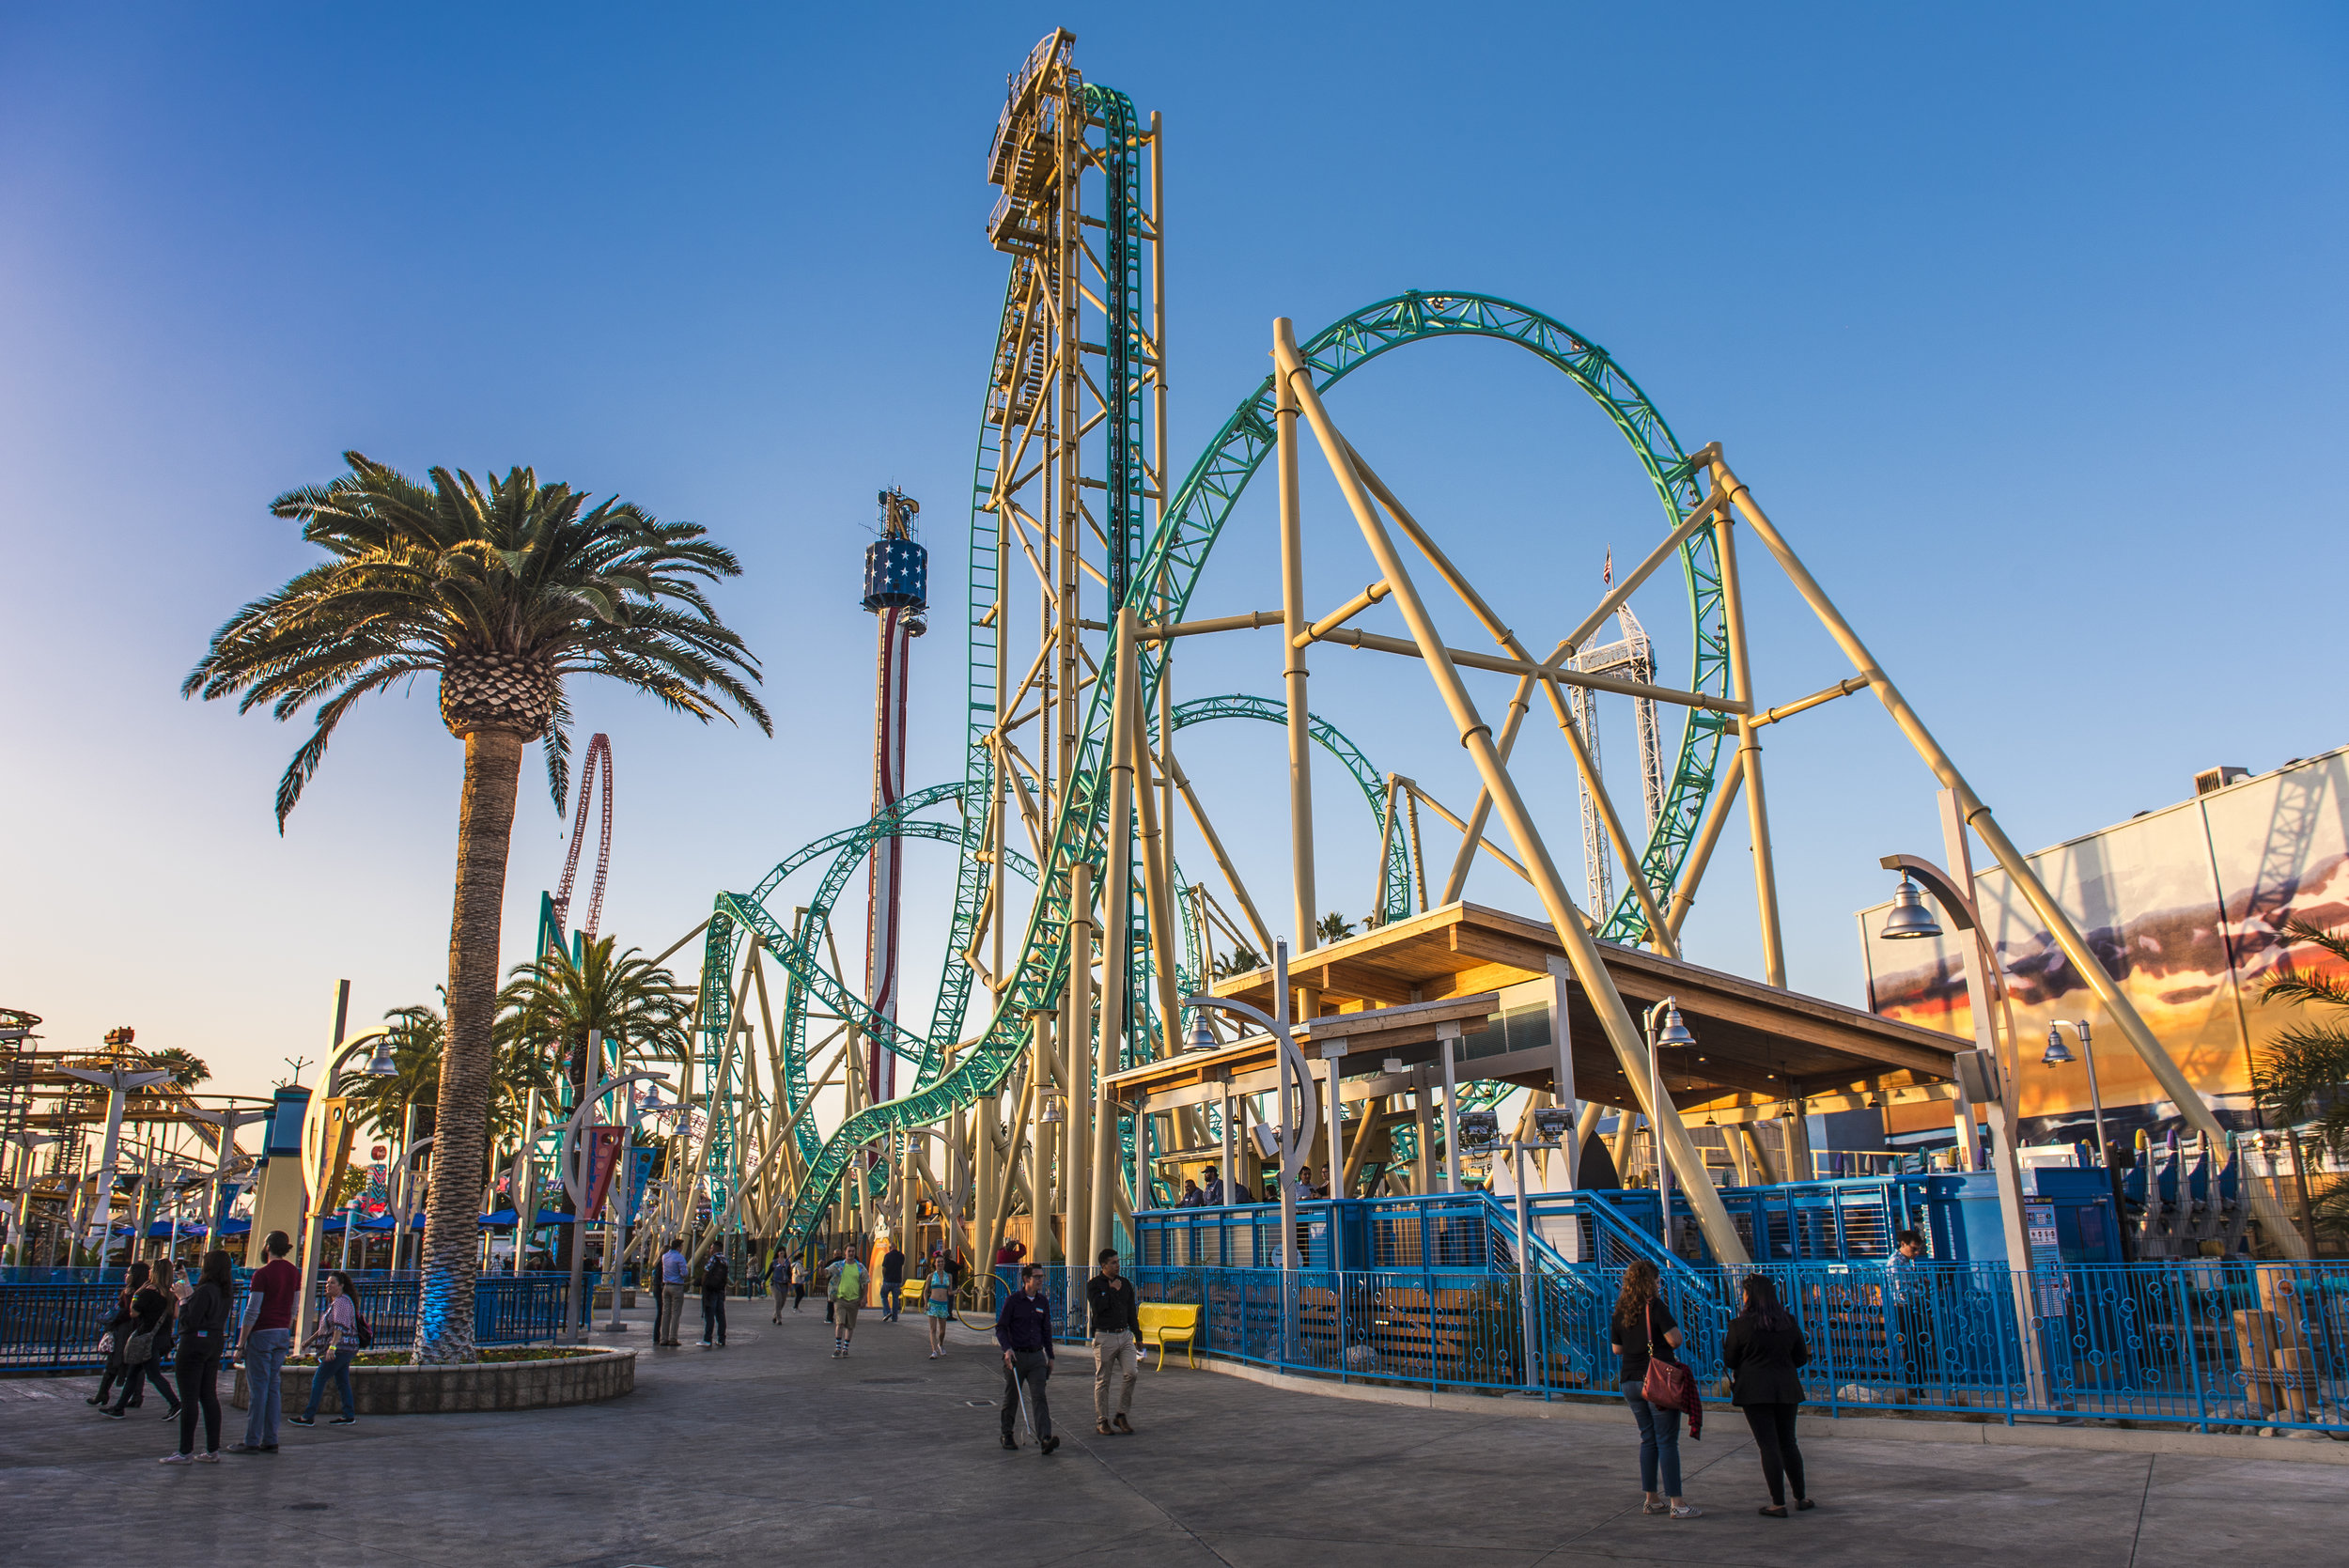  Welcome to Knott’s at golden hour. 